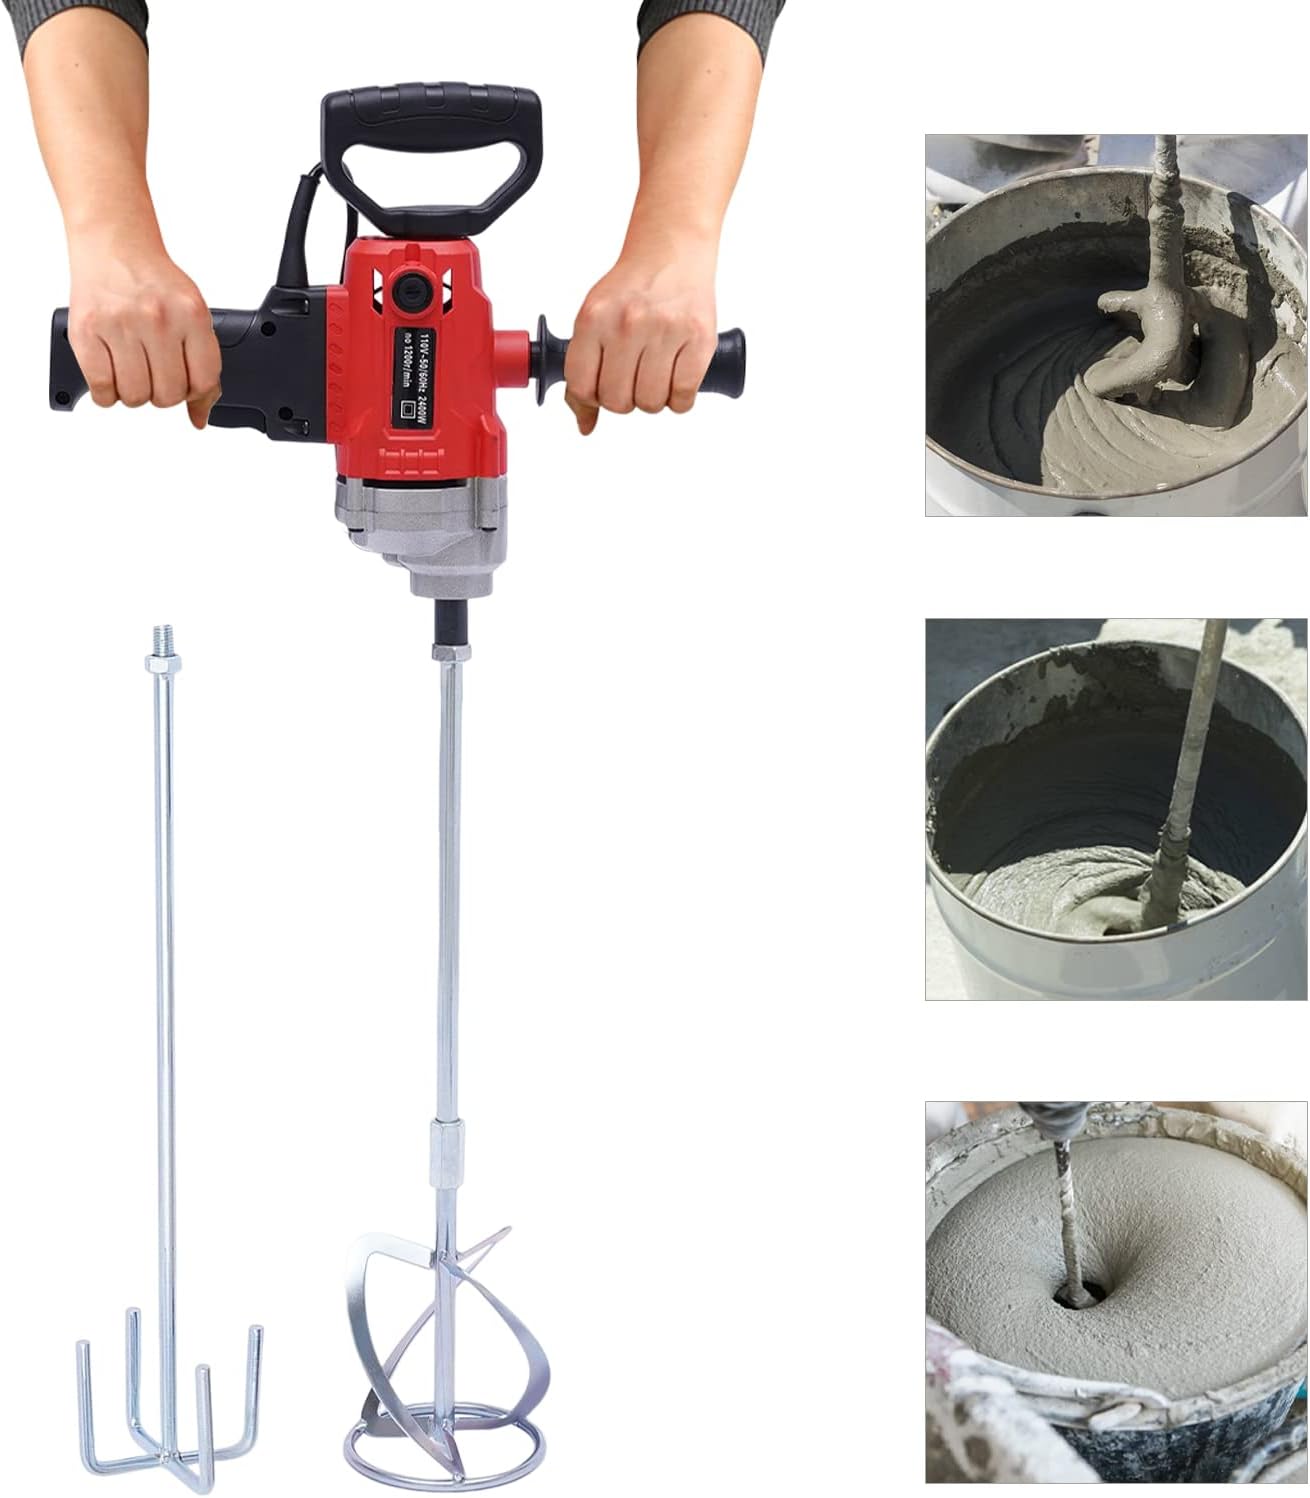 Drill Mixer Set with 2 Spade Handle, 6 Adjustable Speed Electric Handheld Cement Mixer, 2400W Concrete Paint Mixer Drill Mud Mixer, Electric Corded Mixing Drill Machine for Mixing Mortar Plaster